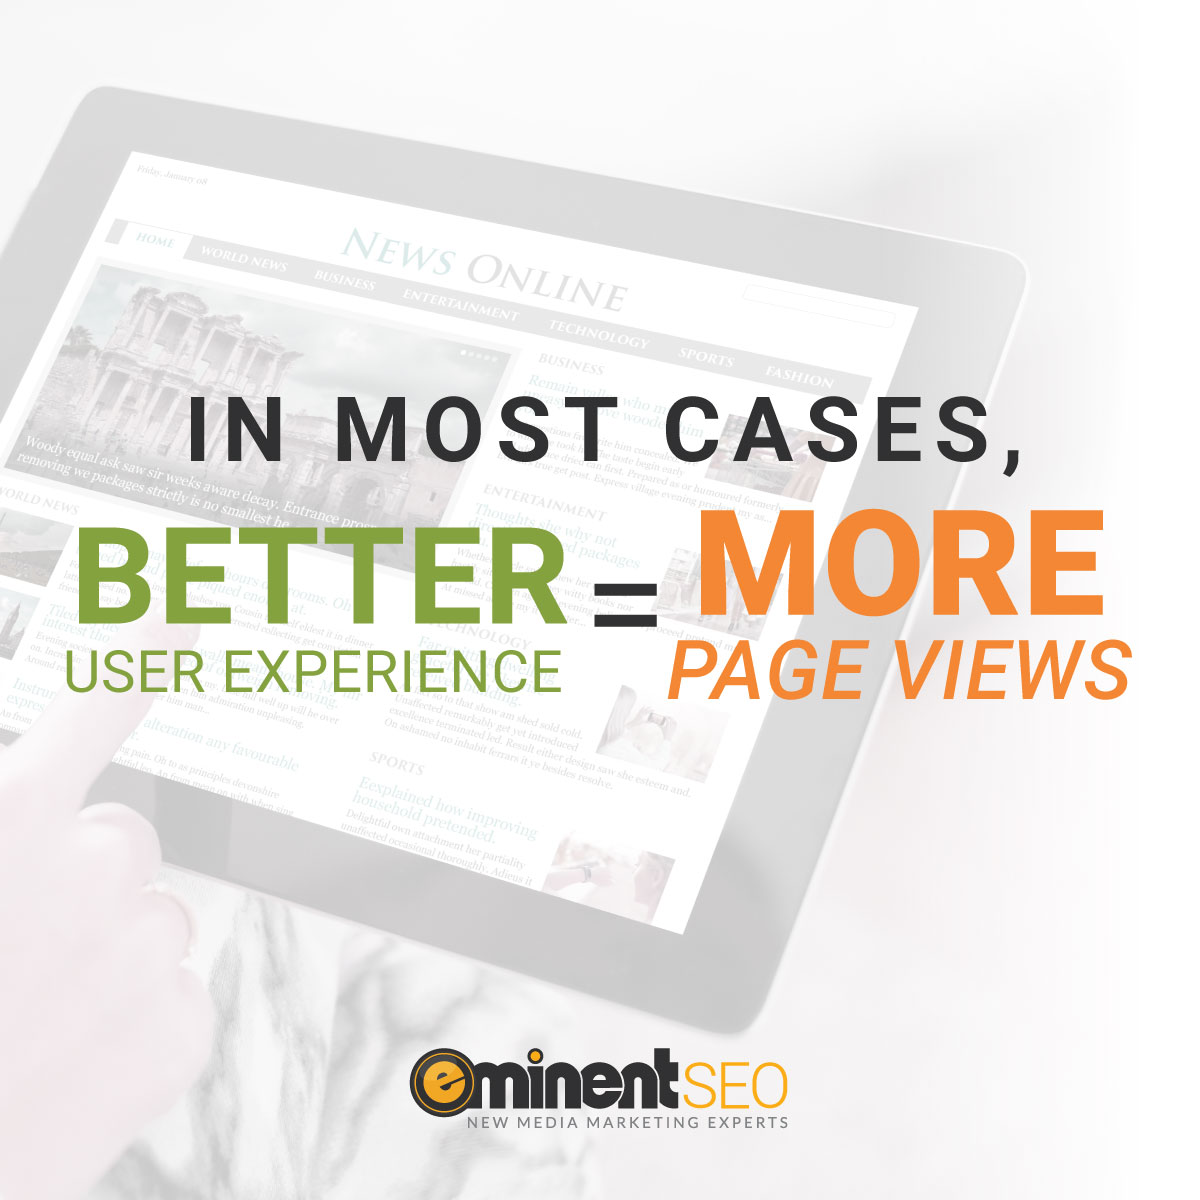 Better User Experience Equals More Page Views - Eminent SEO